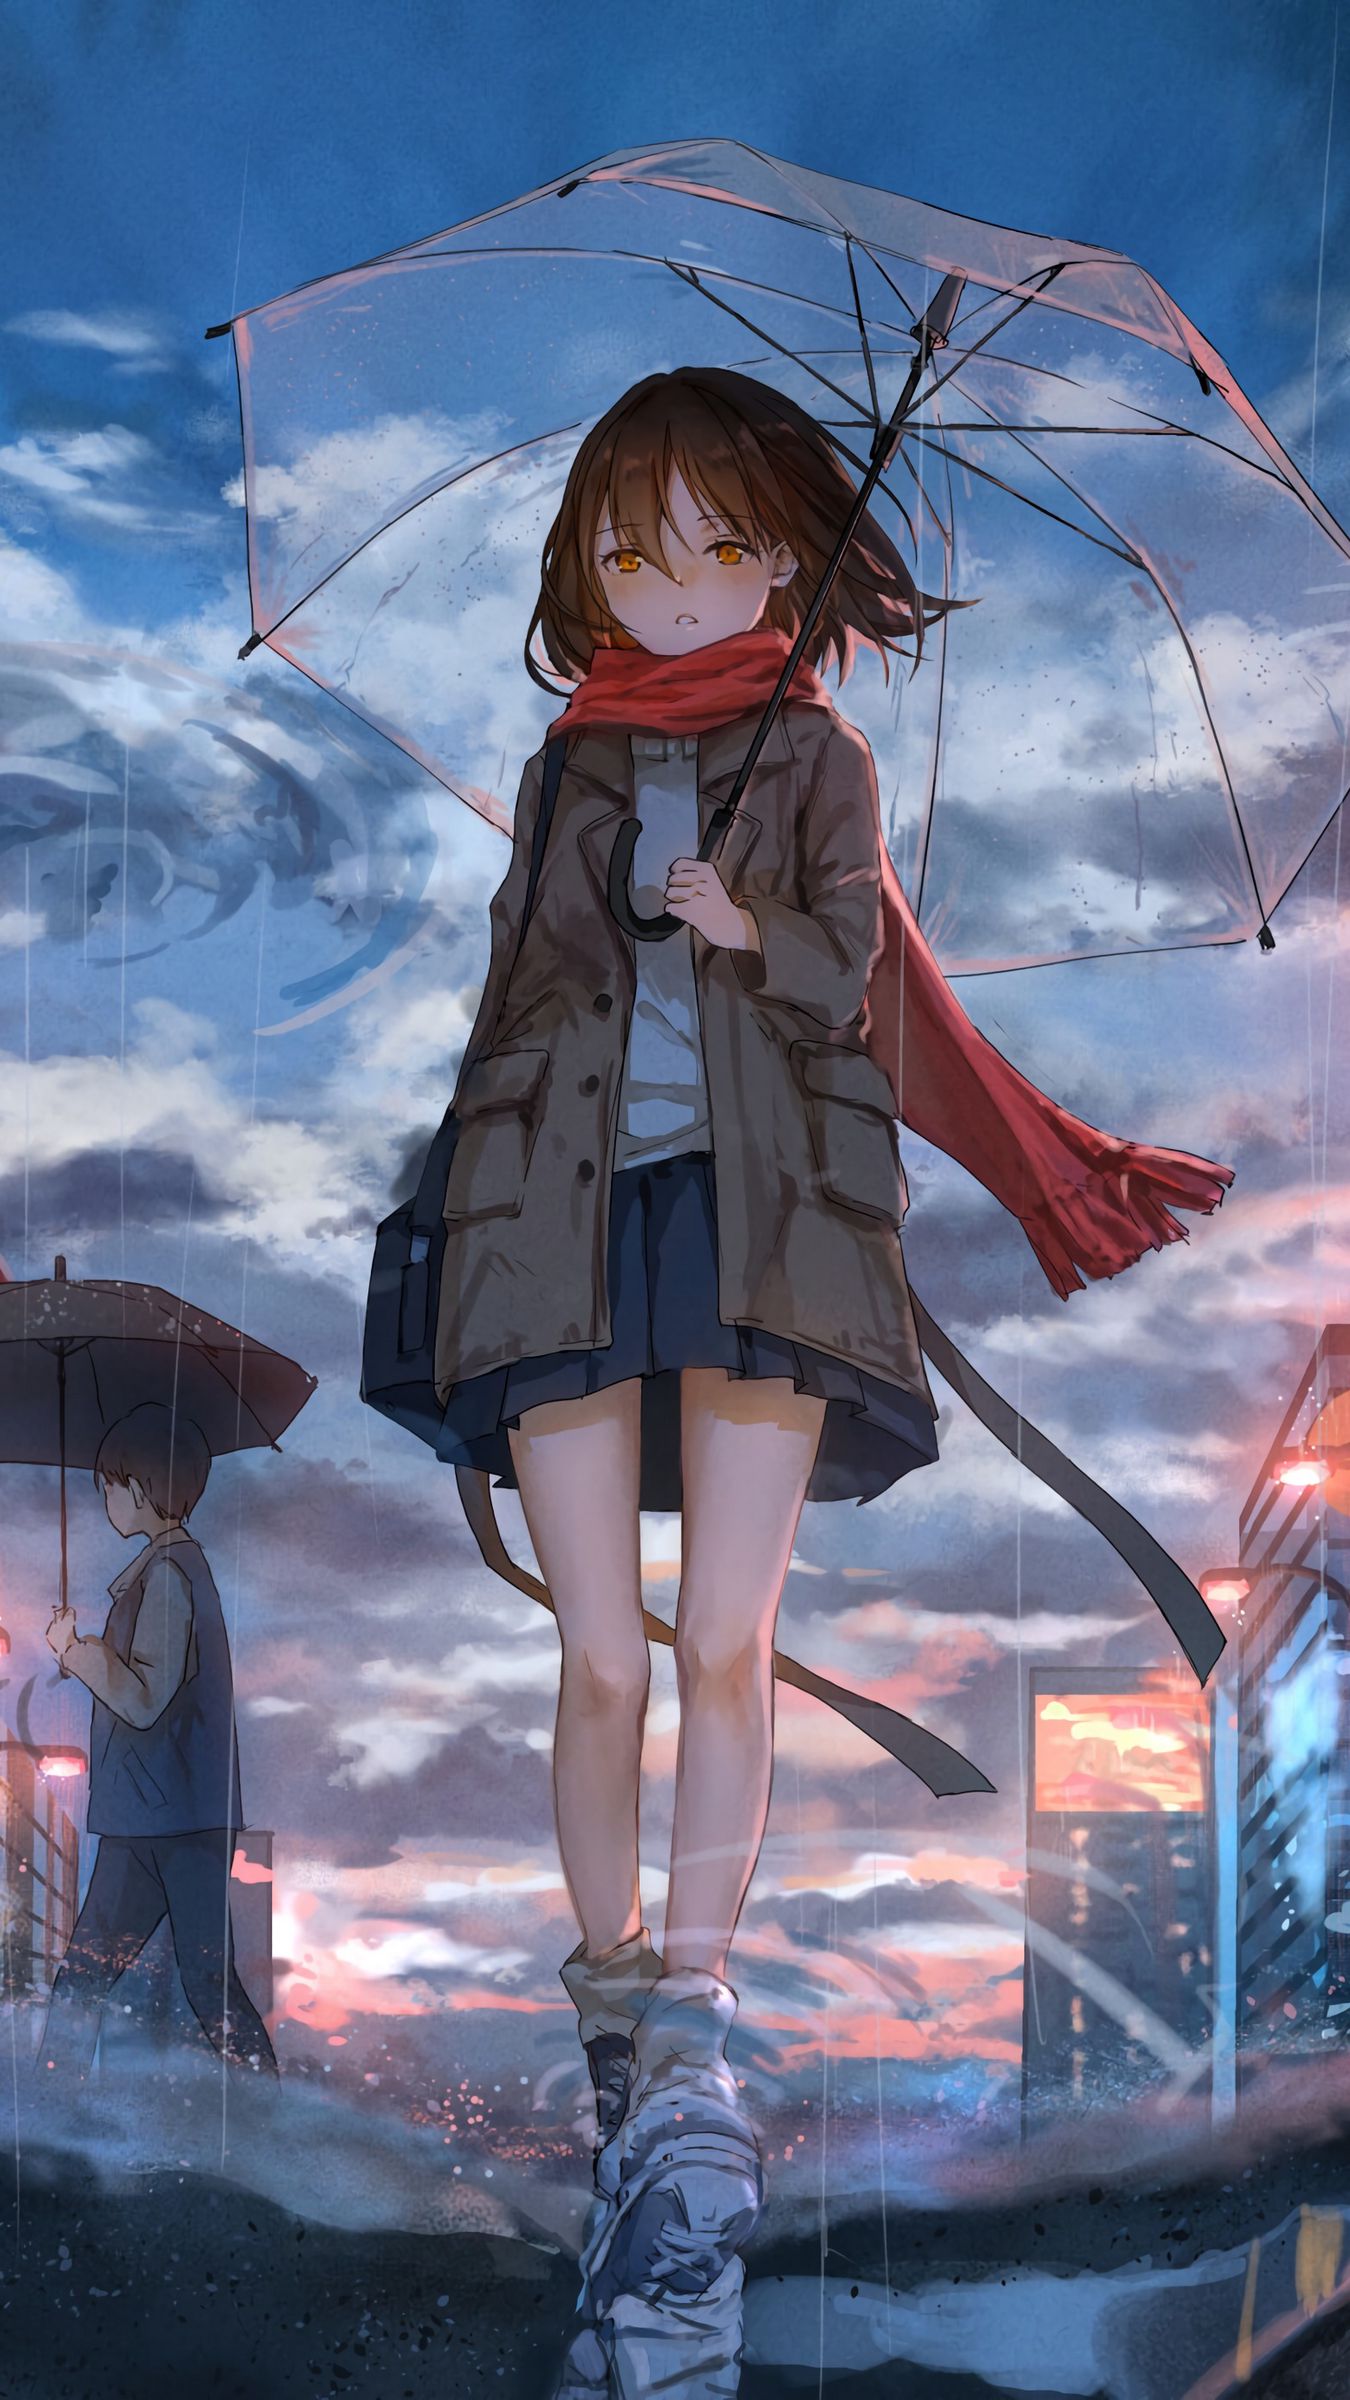 Umbrella Rain Anime Girl 4k HD Anime 4k Wallpapers Images Backgrounds  Photos and Pictures